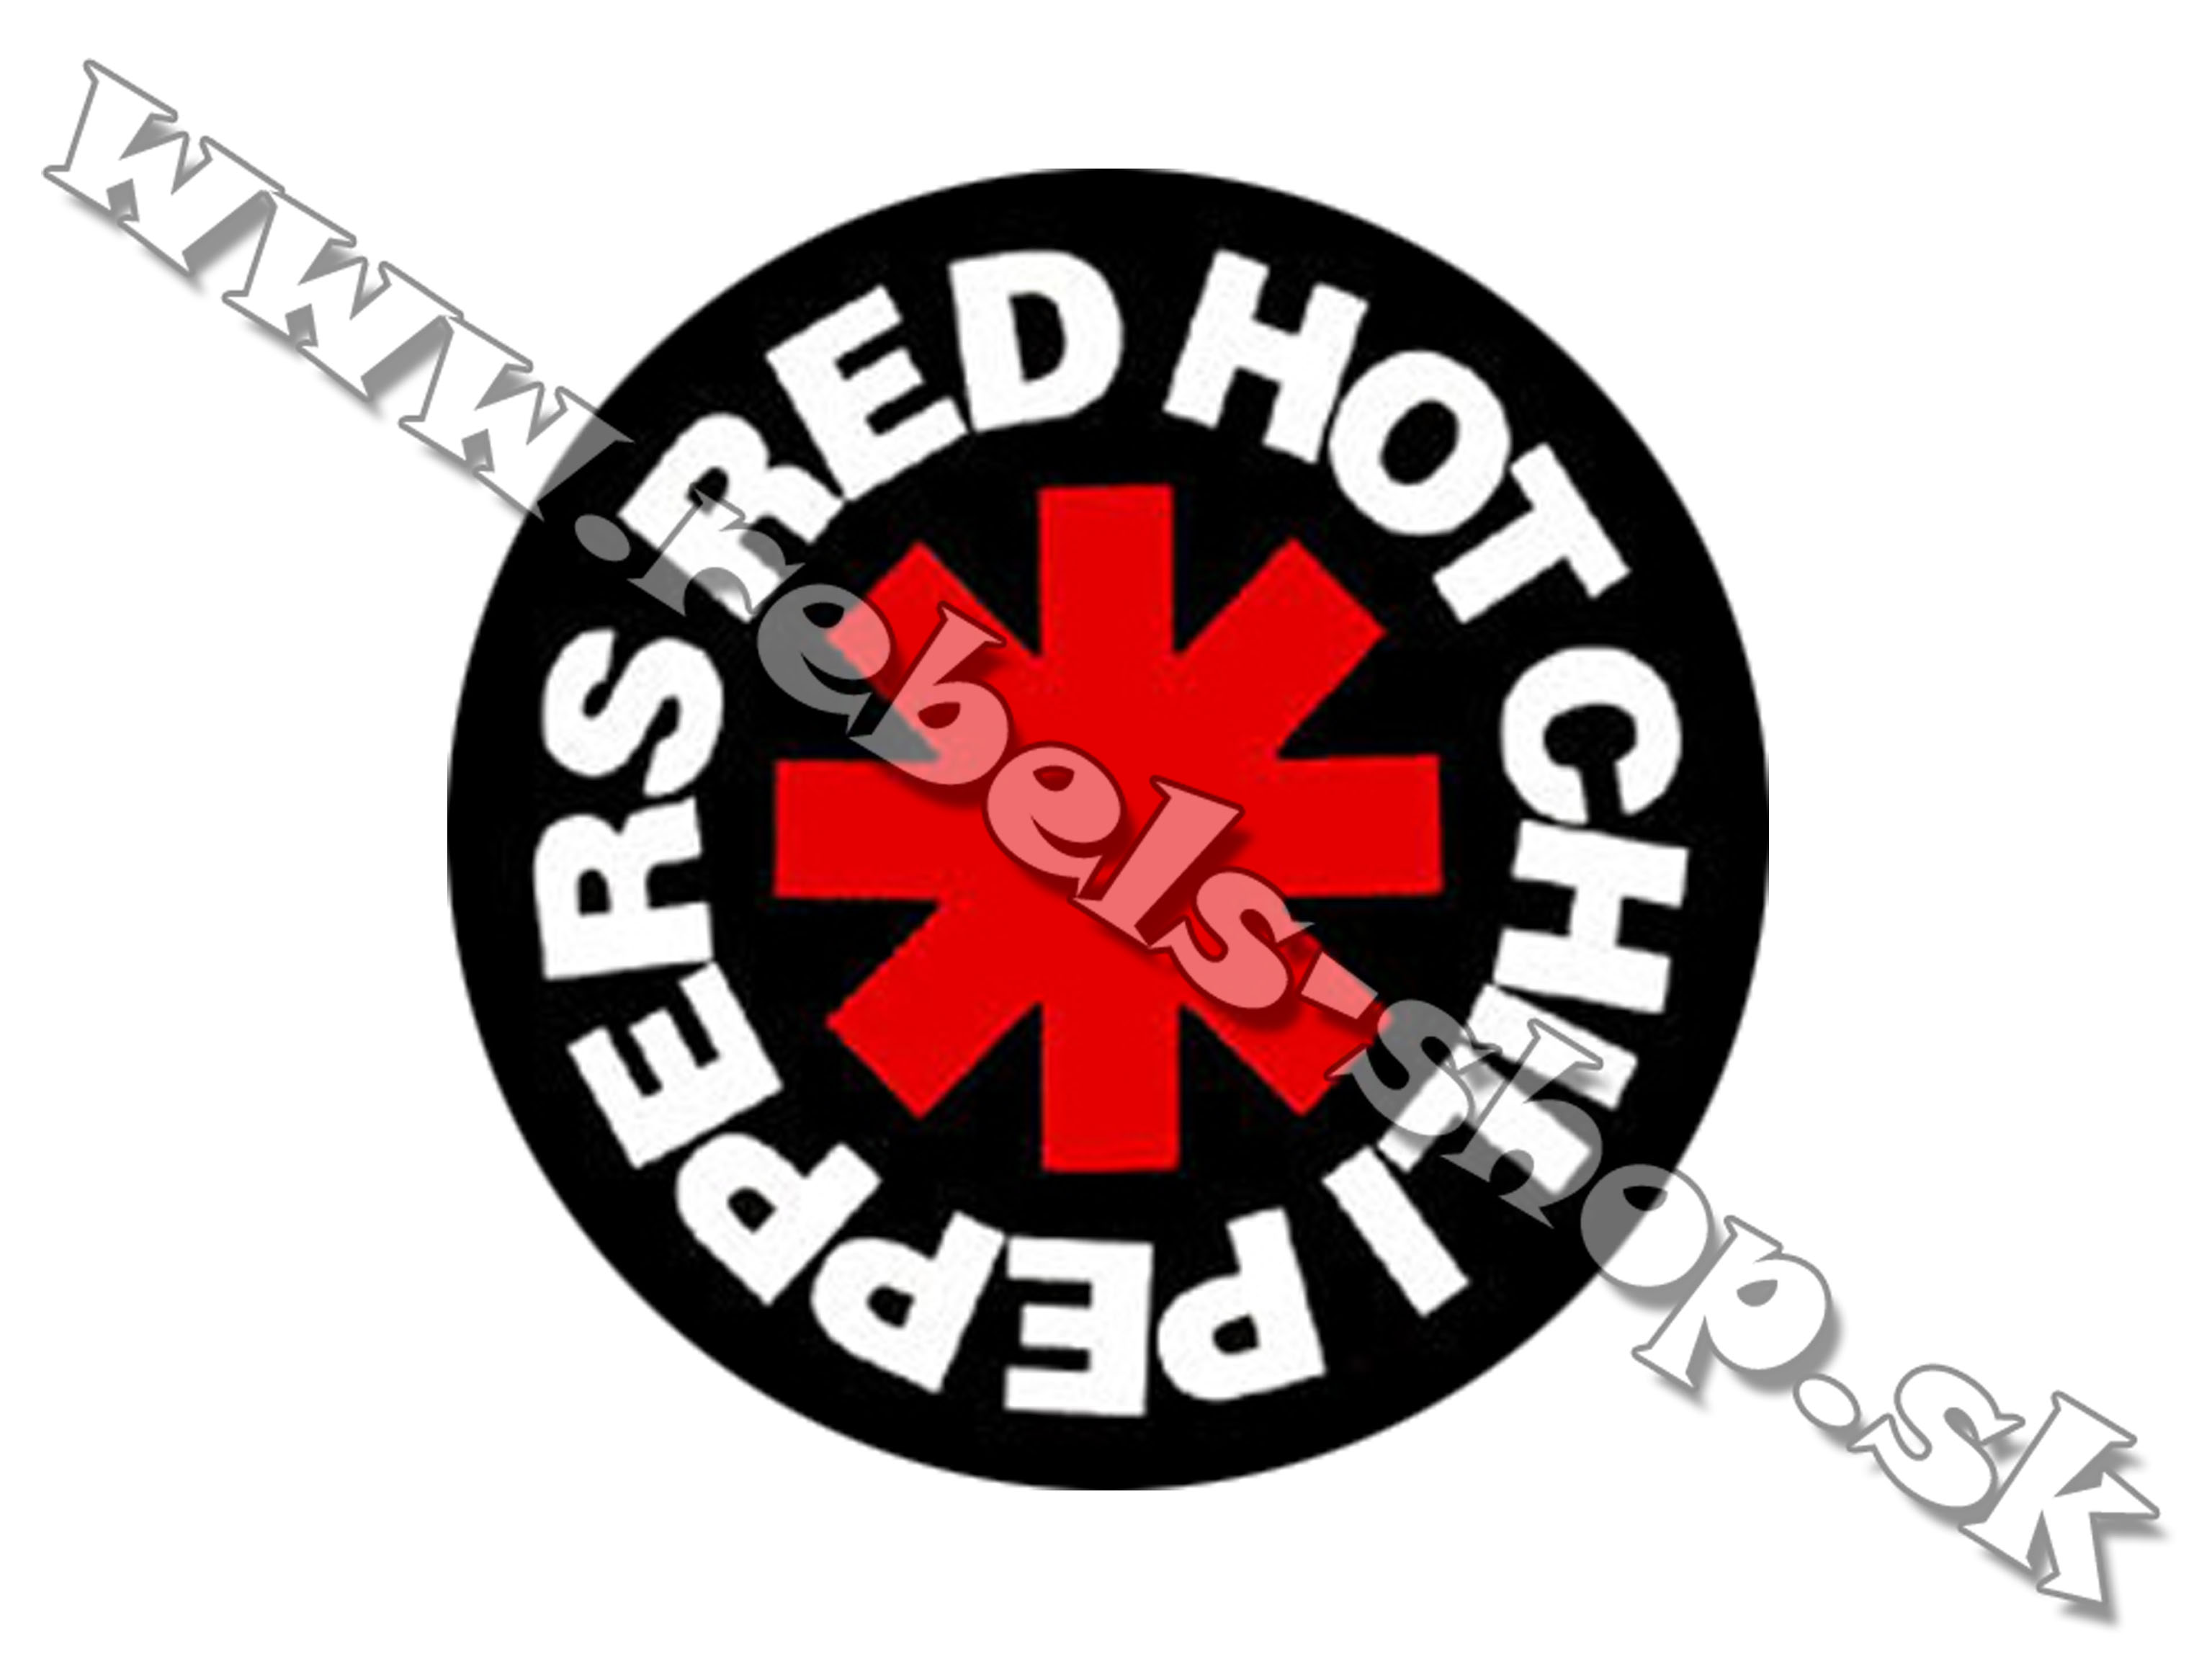 Odznak "Red Hot Chili Peppers"